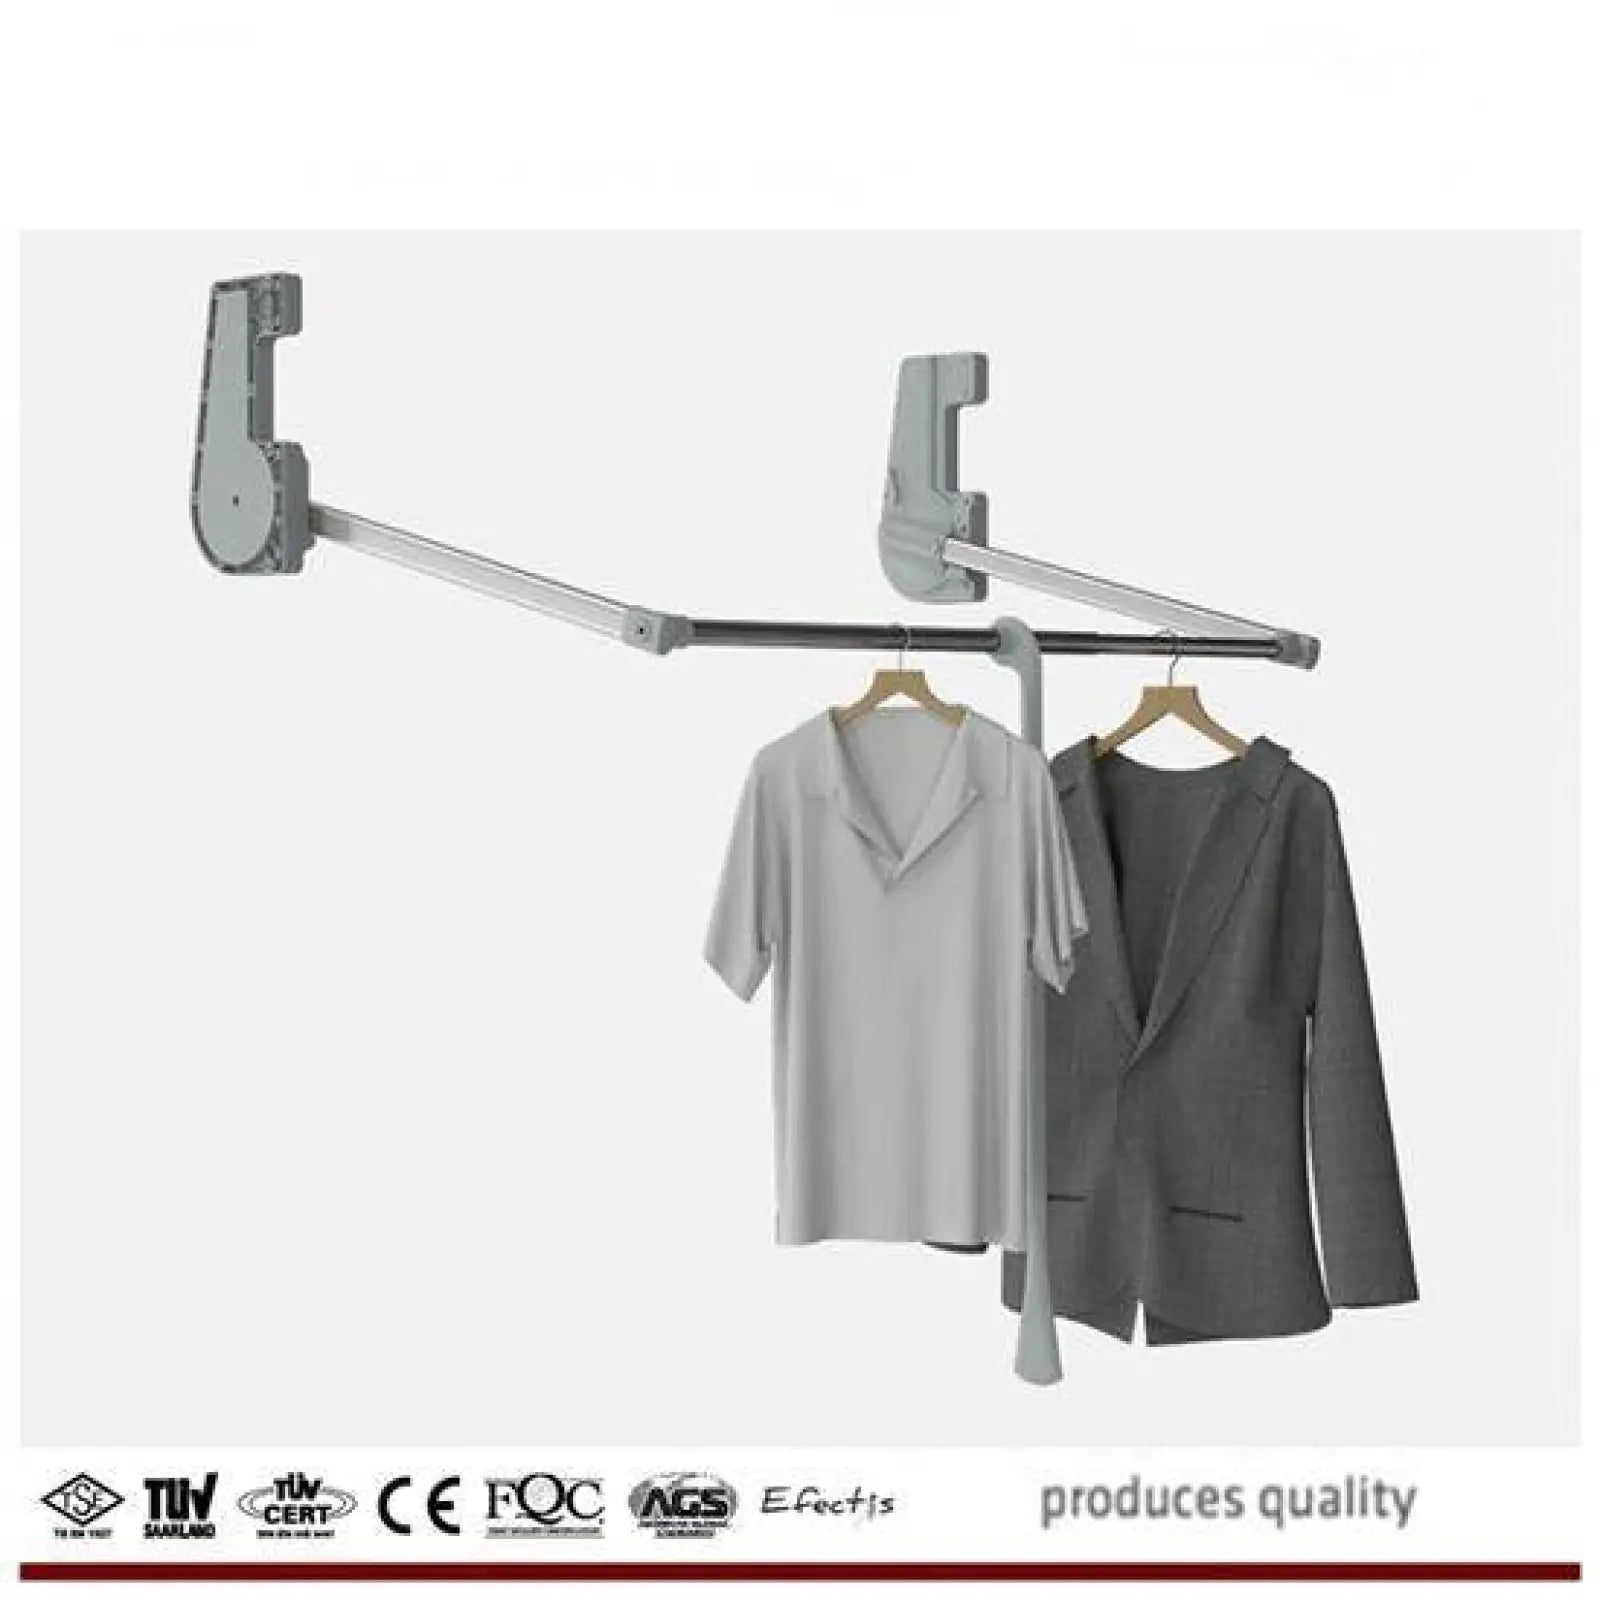 5kg-soft-close-lift-pull-down-wardrobe-clothes-hanging-rail-750mm-1150mm-decor-and-decor-14991462236238